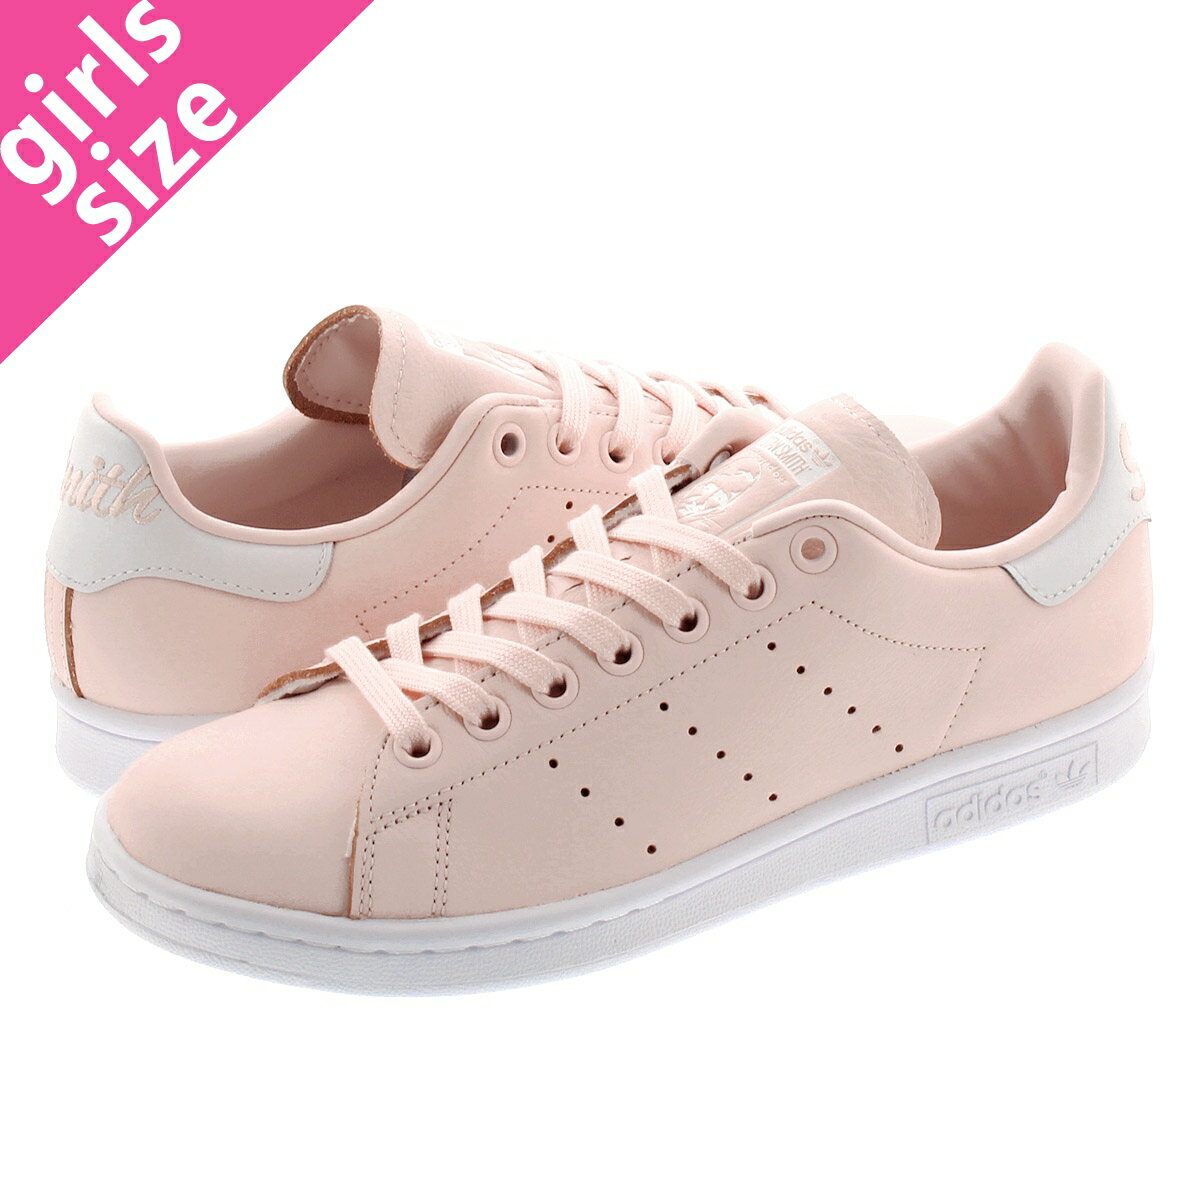 stan smith adidas pink and white